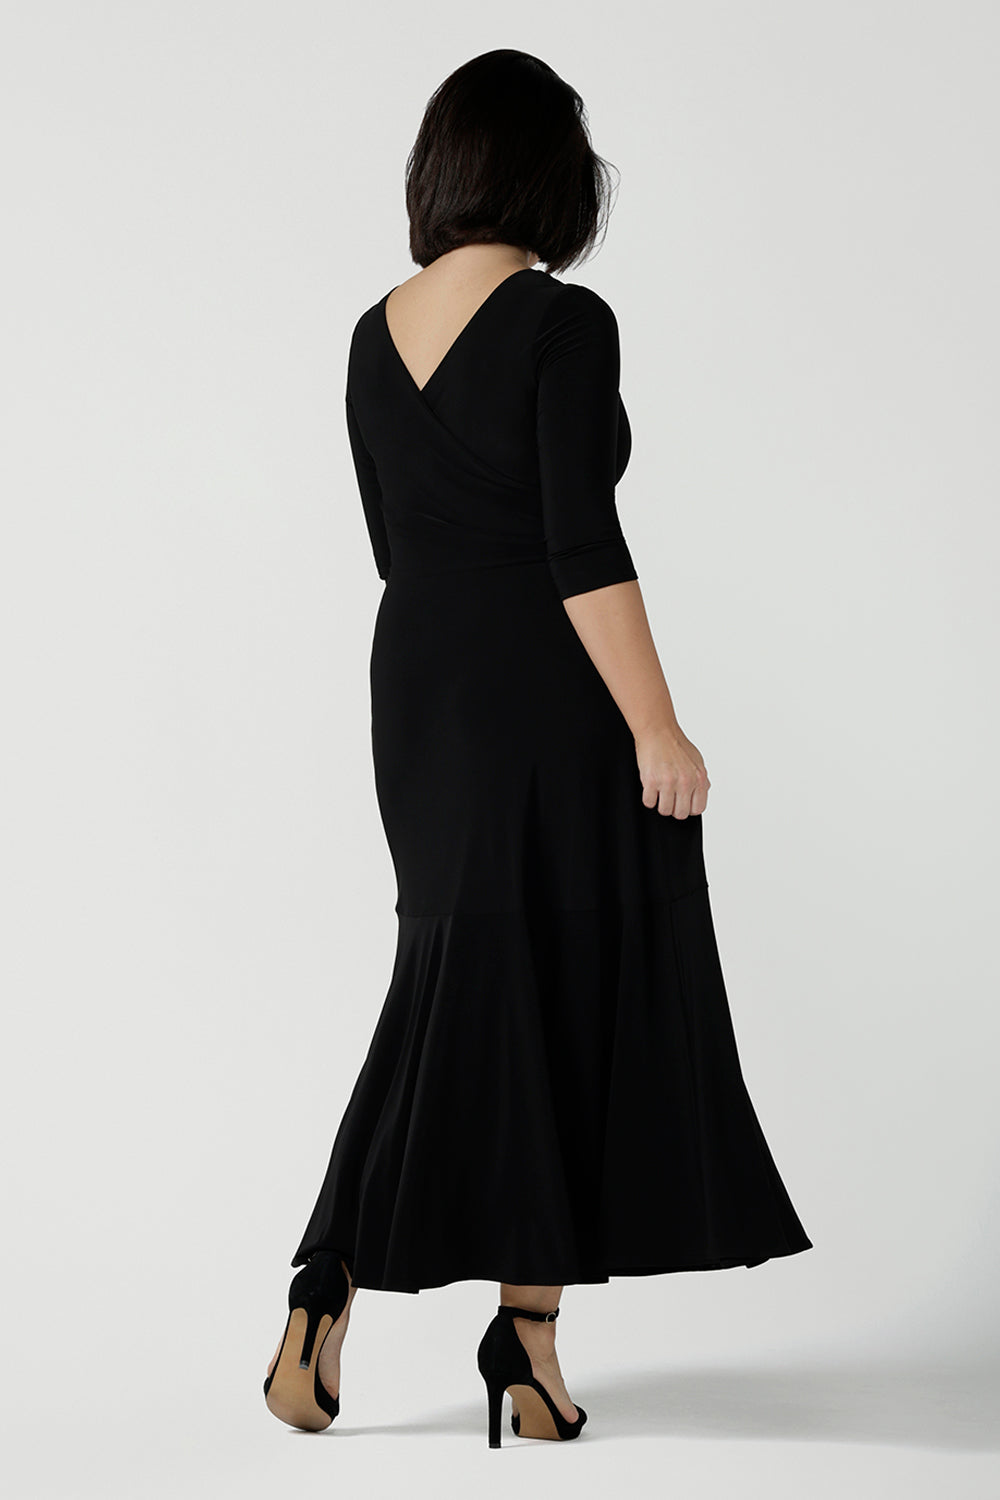 Back view of size 10 woman wearing a black reversible dress. Black jersey dress with black heels. Made in Australia for women size 8 - 24. Comfortable easy care jersey. Made in Australia for women size 8 - 24.